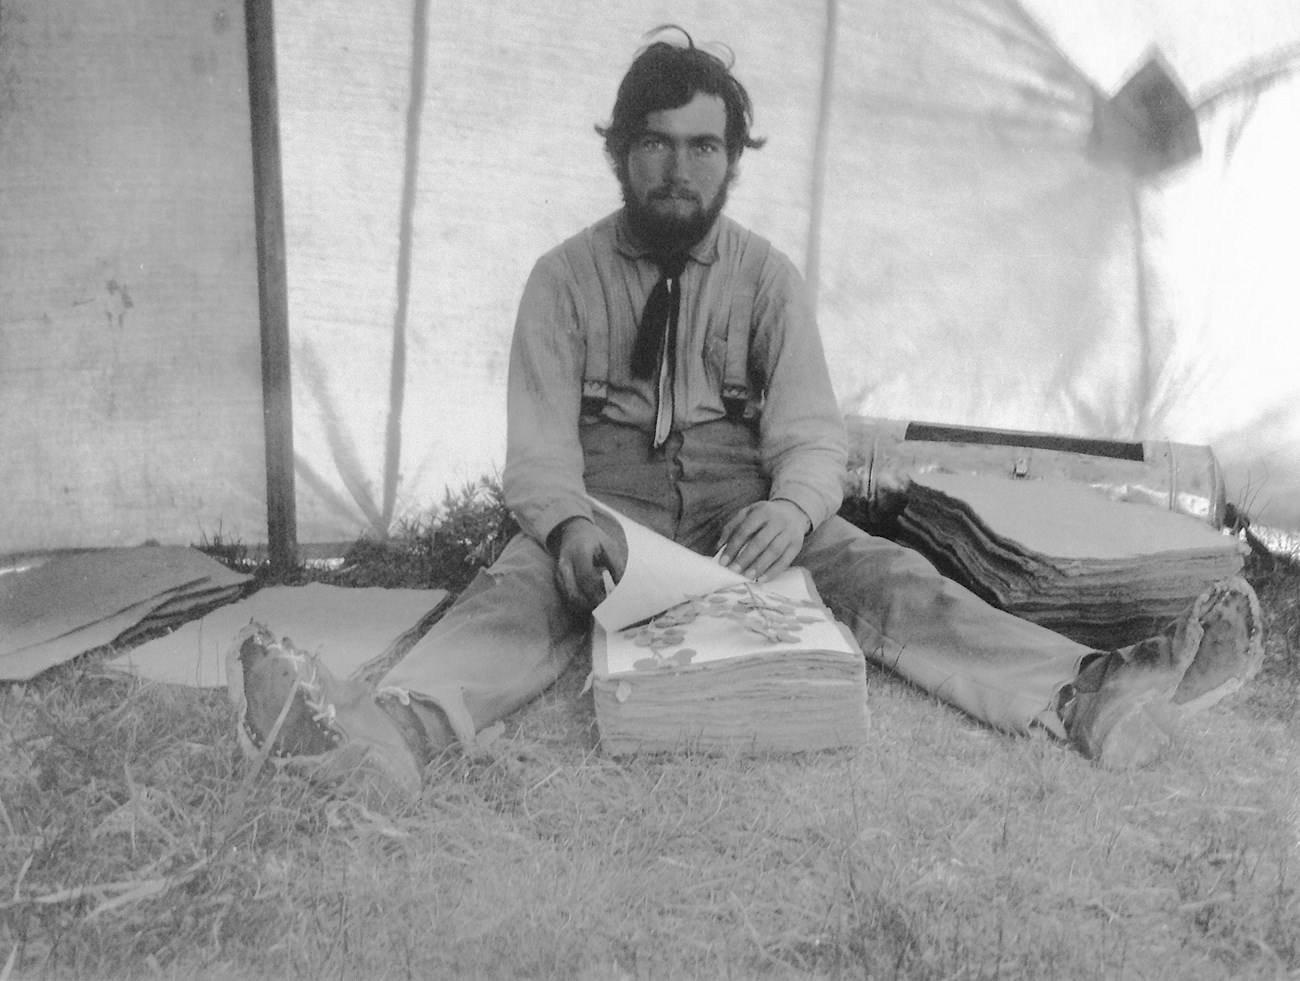 Leslie Goodding sits between stacks of blotters, checking specimens. The photo was taken near the end of the expedition, by which time he had worn the soles off his boots.